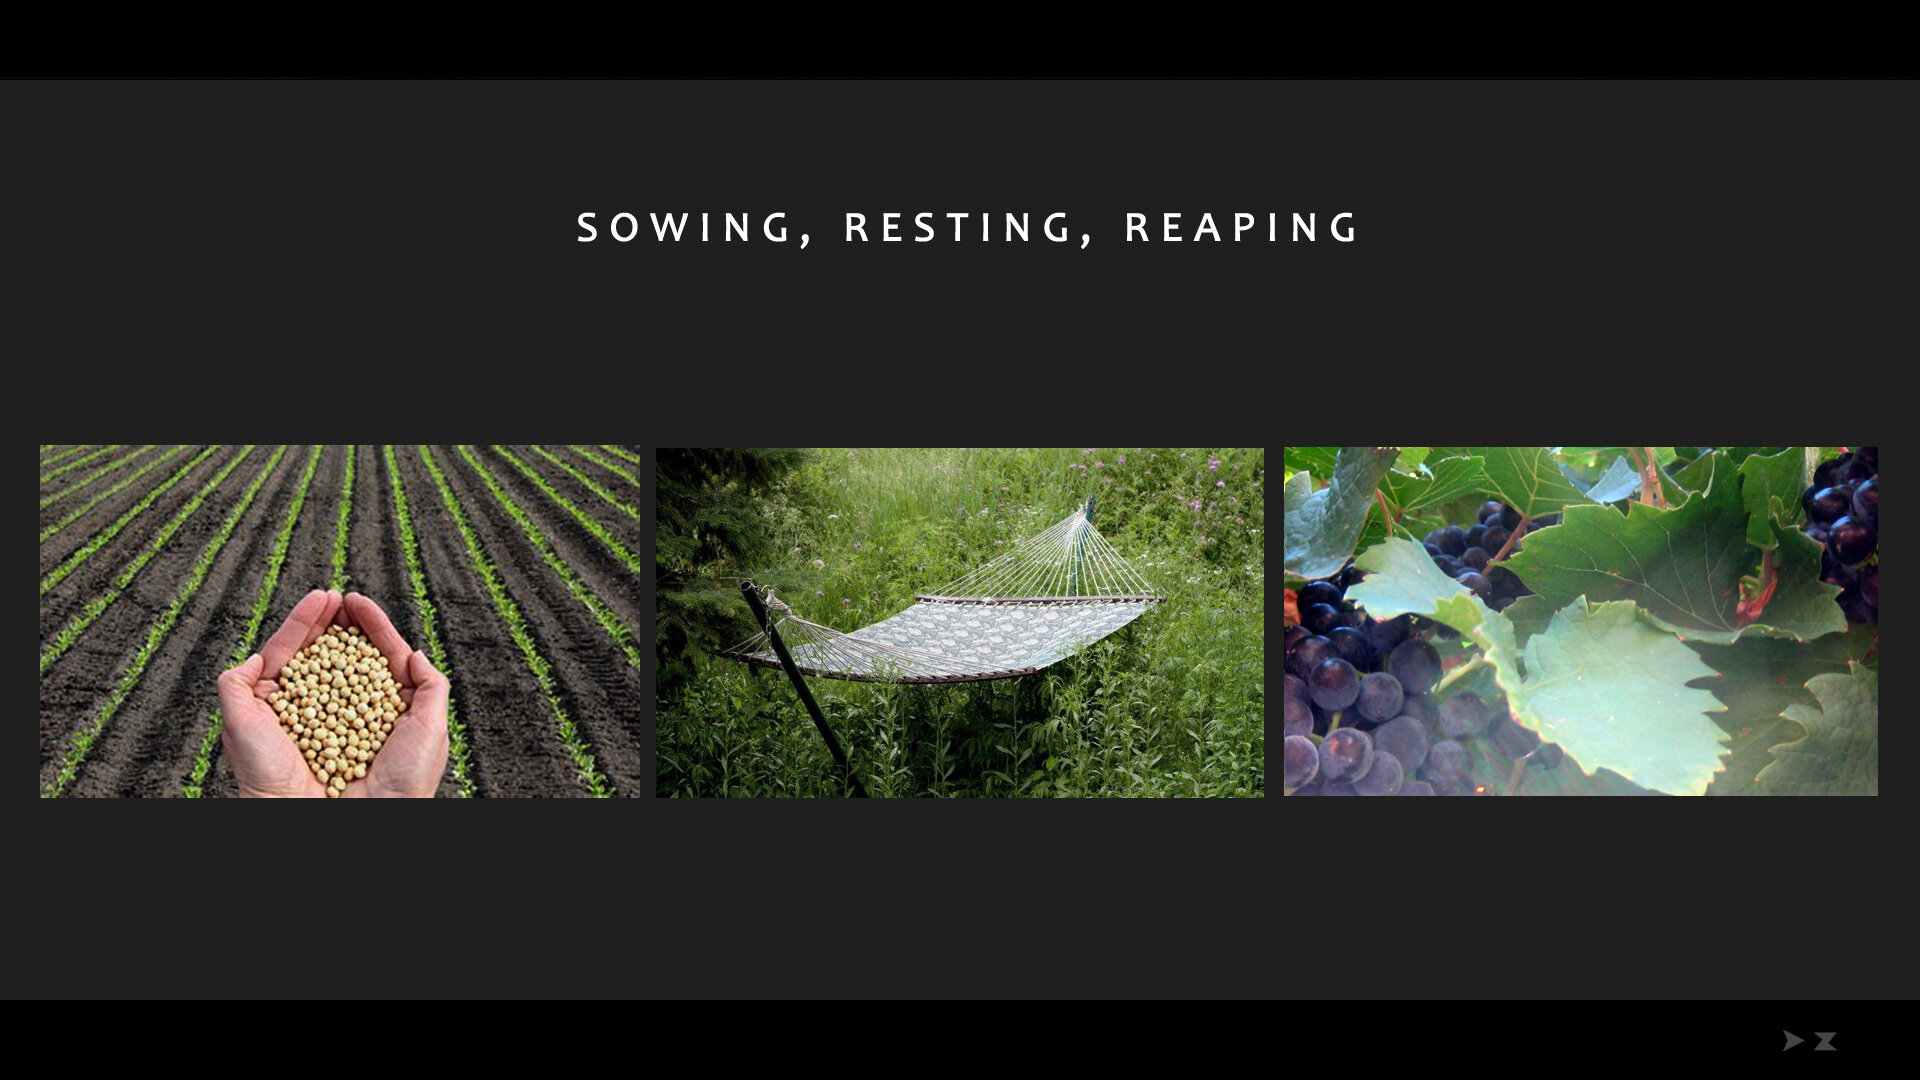 08 sowing-resting-reaping.jpg